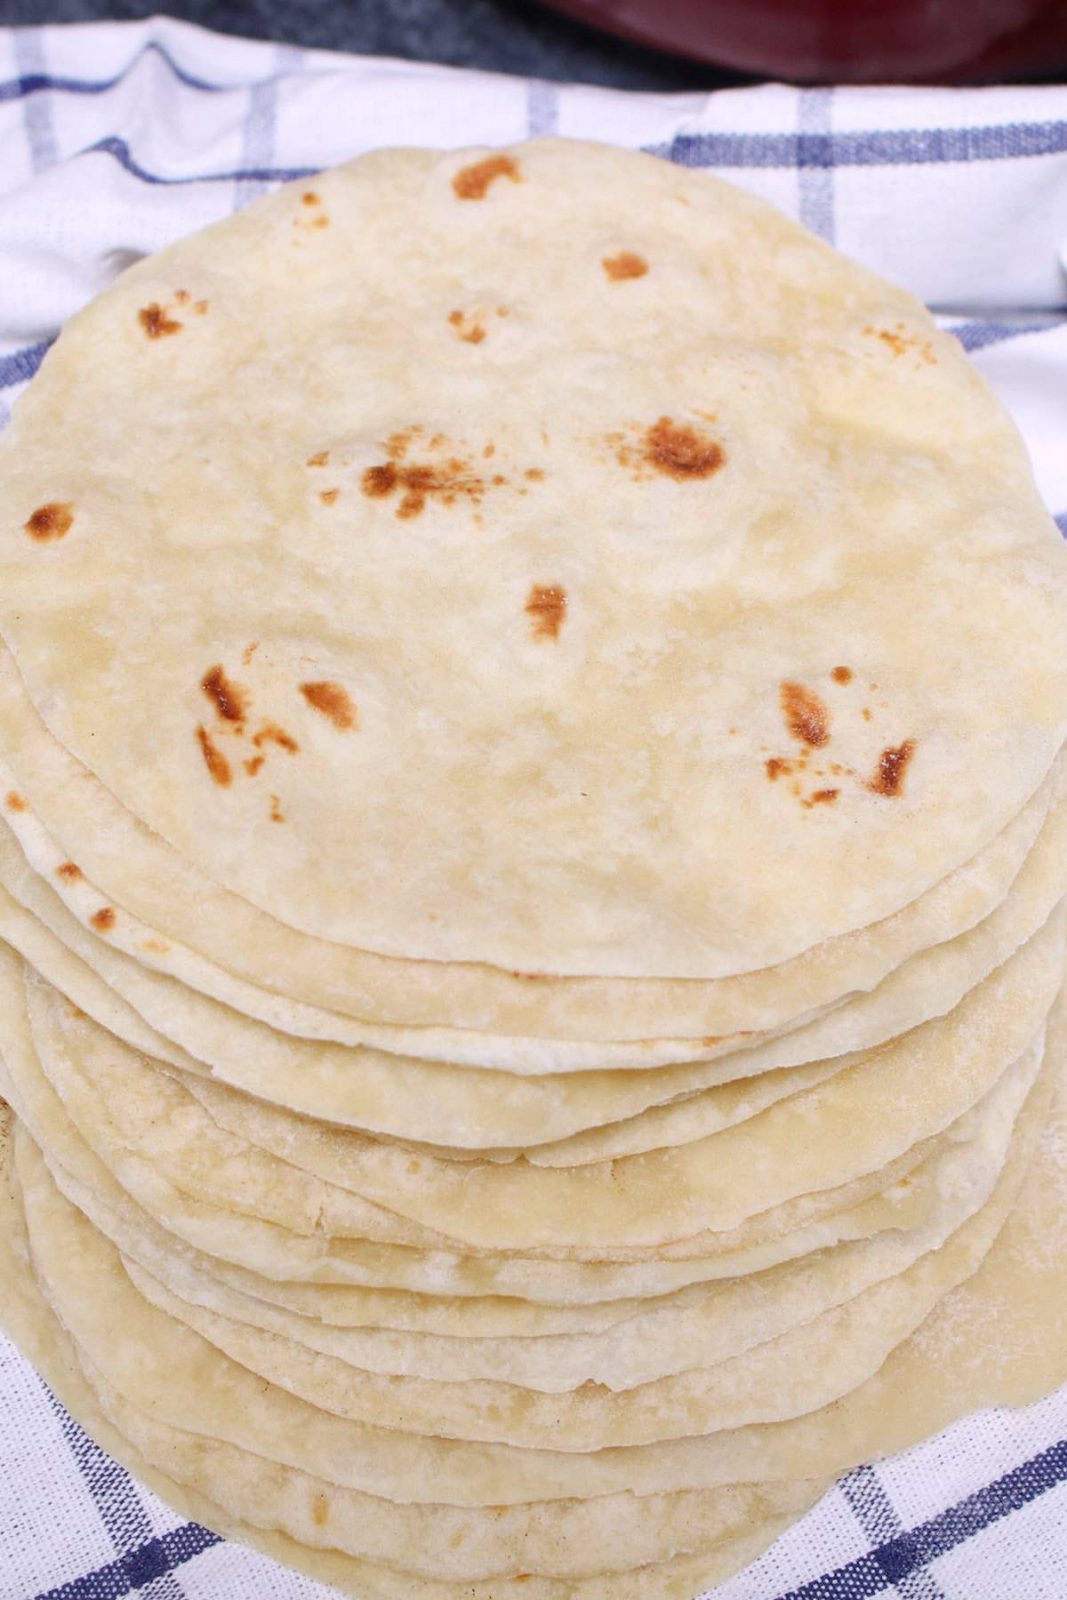 Fresh tortillas are usually sold in packages of 10. So what happens if you’re only feeding 2 and end up with a bunch of extra tortillas? You definitely don’t want to waste them, so what should you do? Luckily, you can freeze tortillas and use them at a later date. You’ll need to follow a few steps but it’s actually quite easy to do.